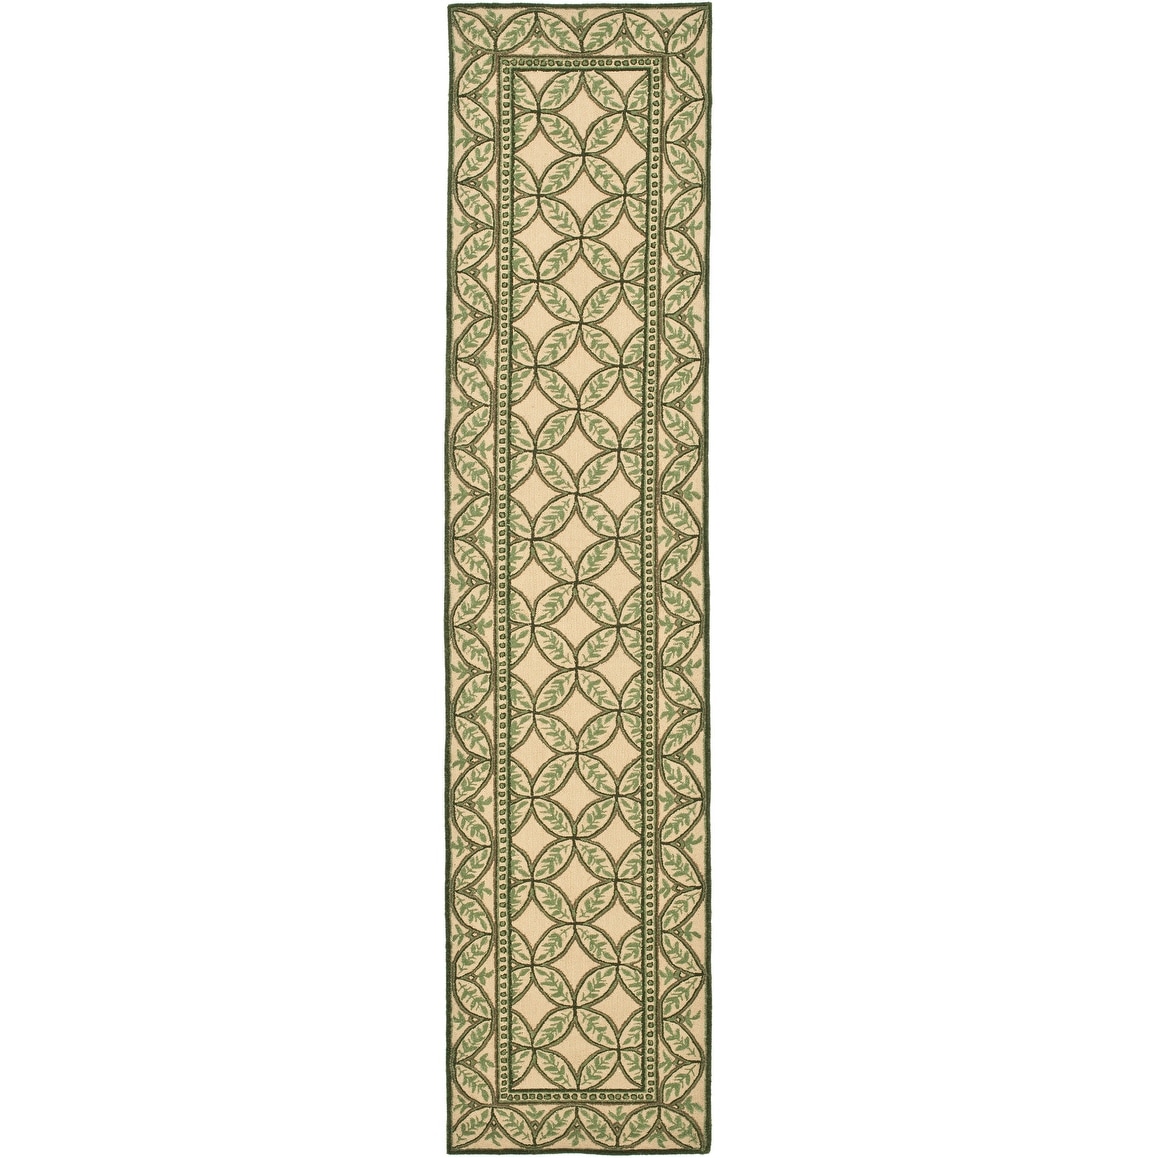 2'3 x 10' Safavieh Wilton Collection WIL330A Hand-Hooked Country Cottage Floral Wool Runner Taupe Green 